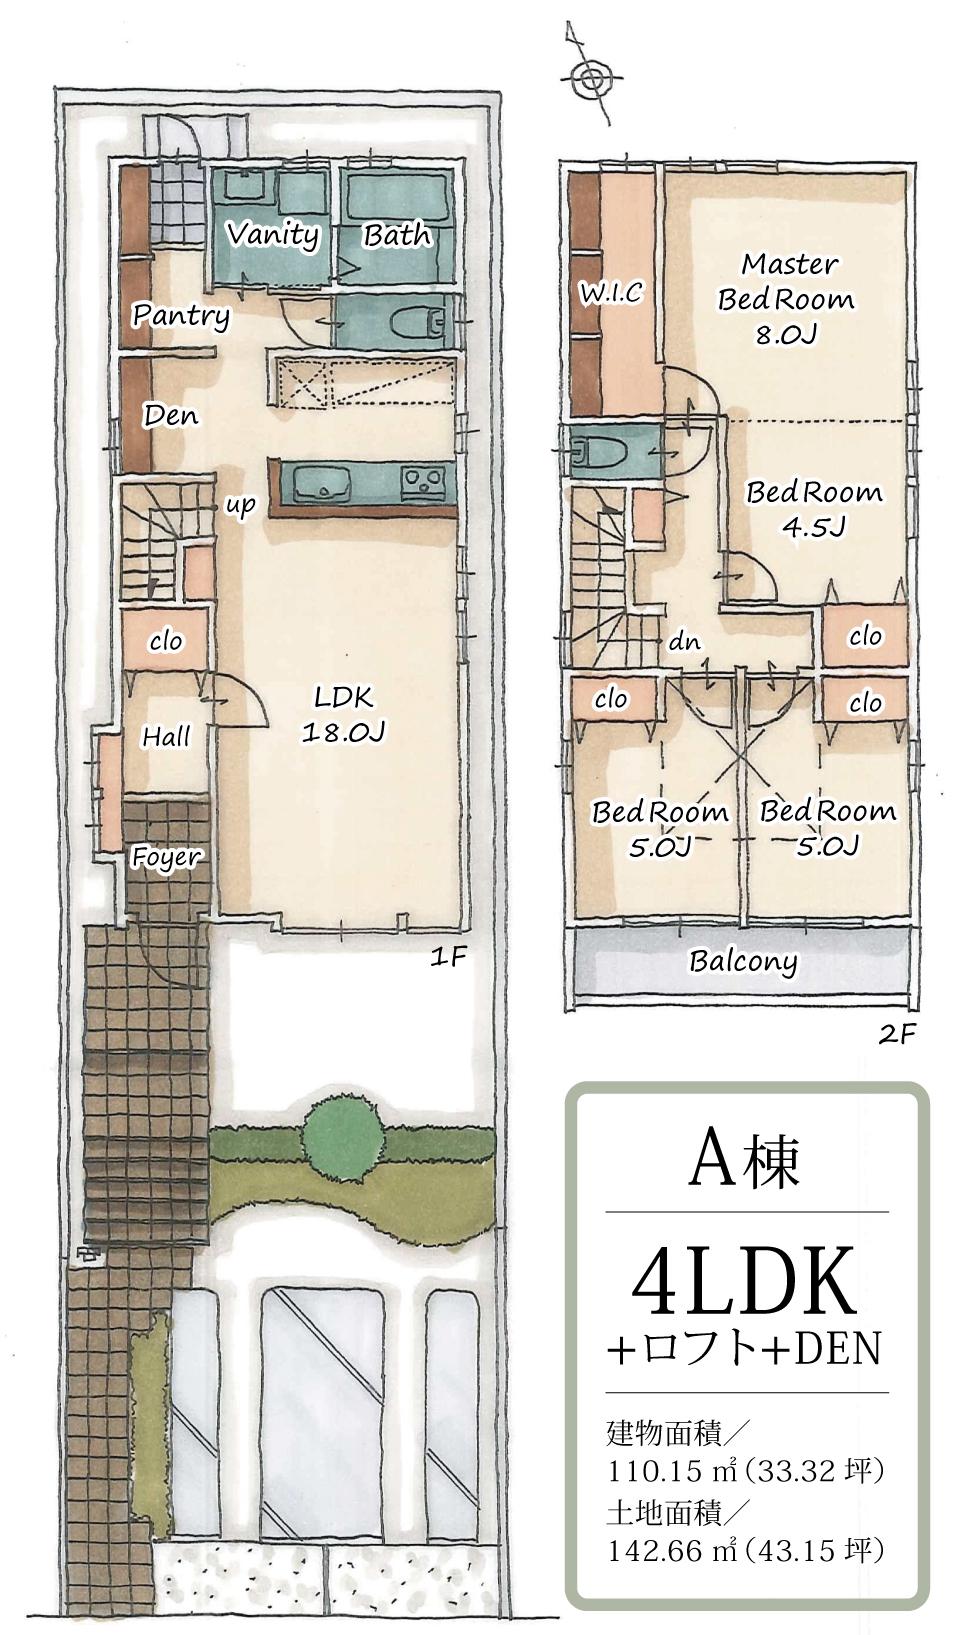 Floor plan. Spacious garden of gardening also enjoy south. With a performance to fulfill a wide and comfortable living room, House bathed in bright sunlight from the windows and atrium